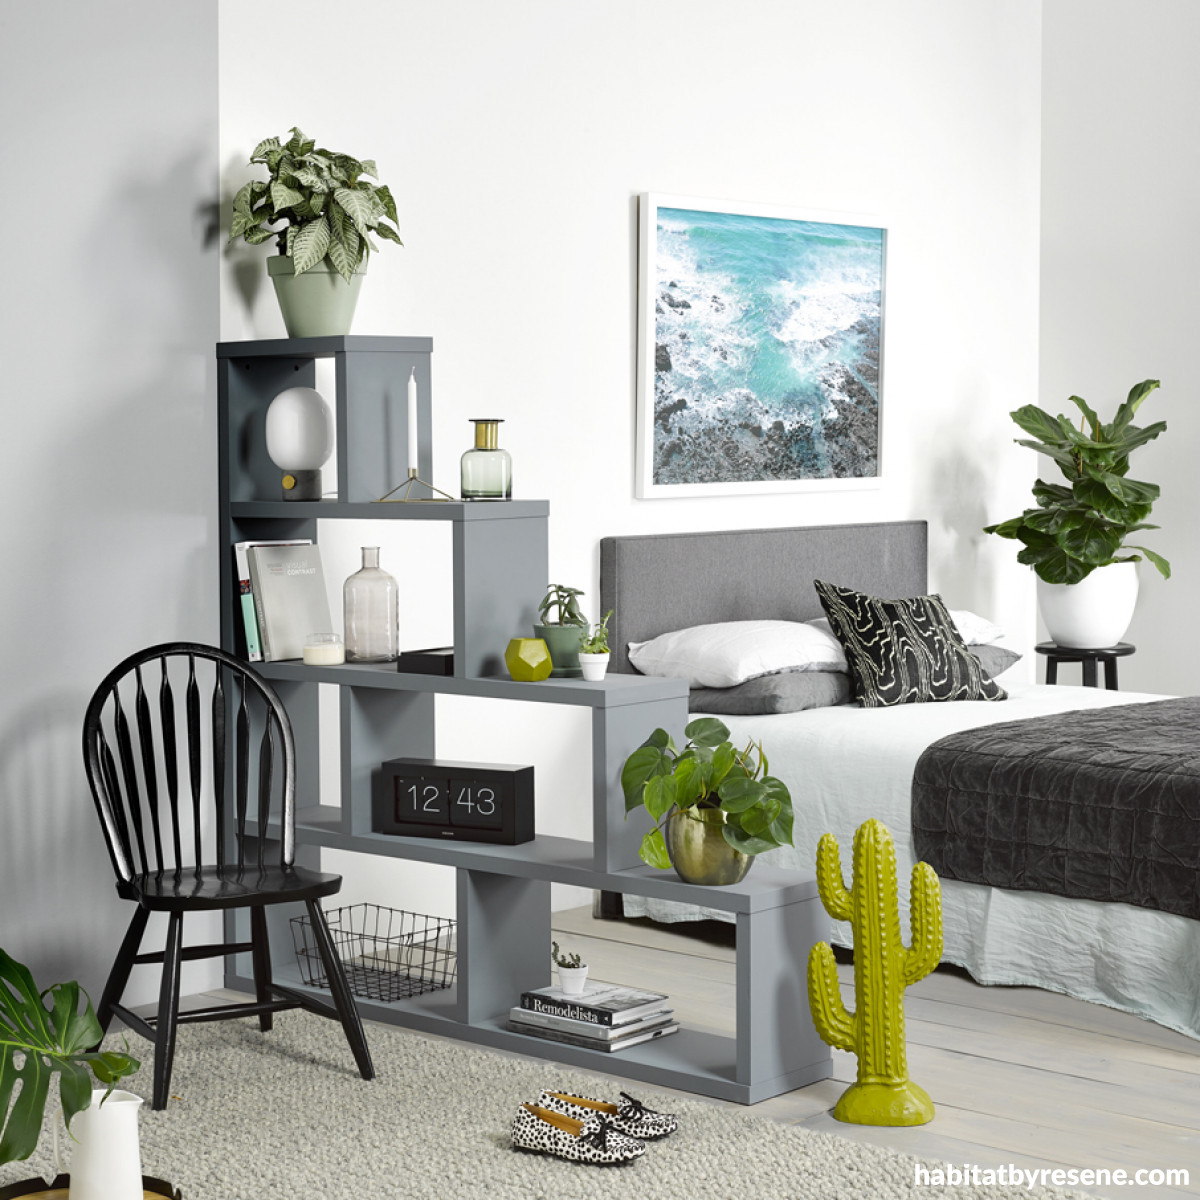 Ideas For Small Space Living Habitat By Resene